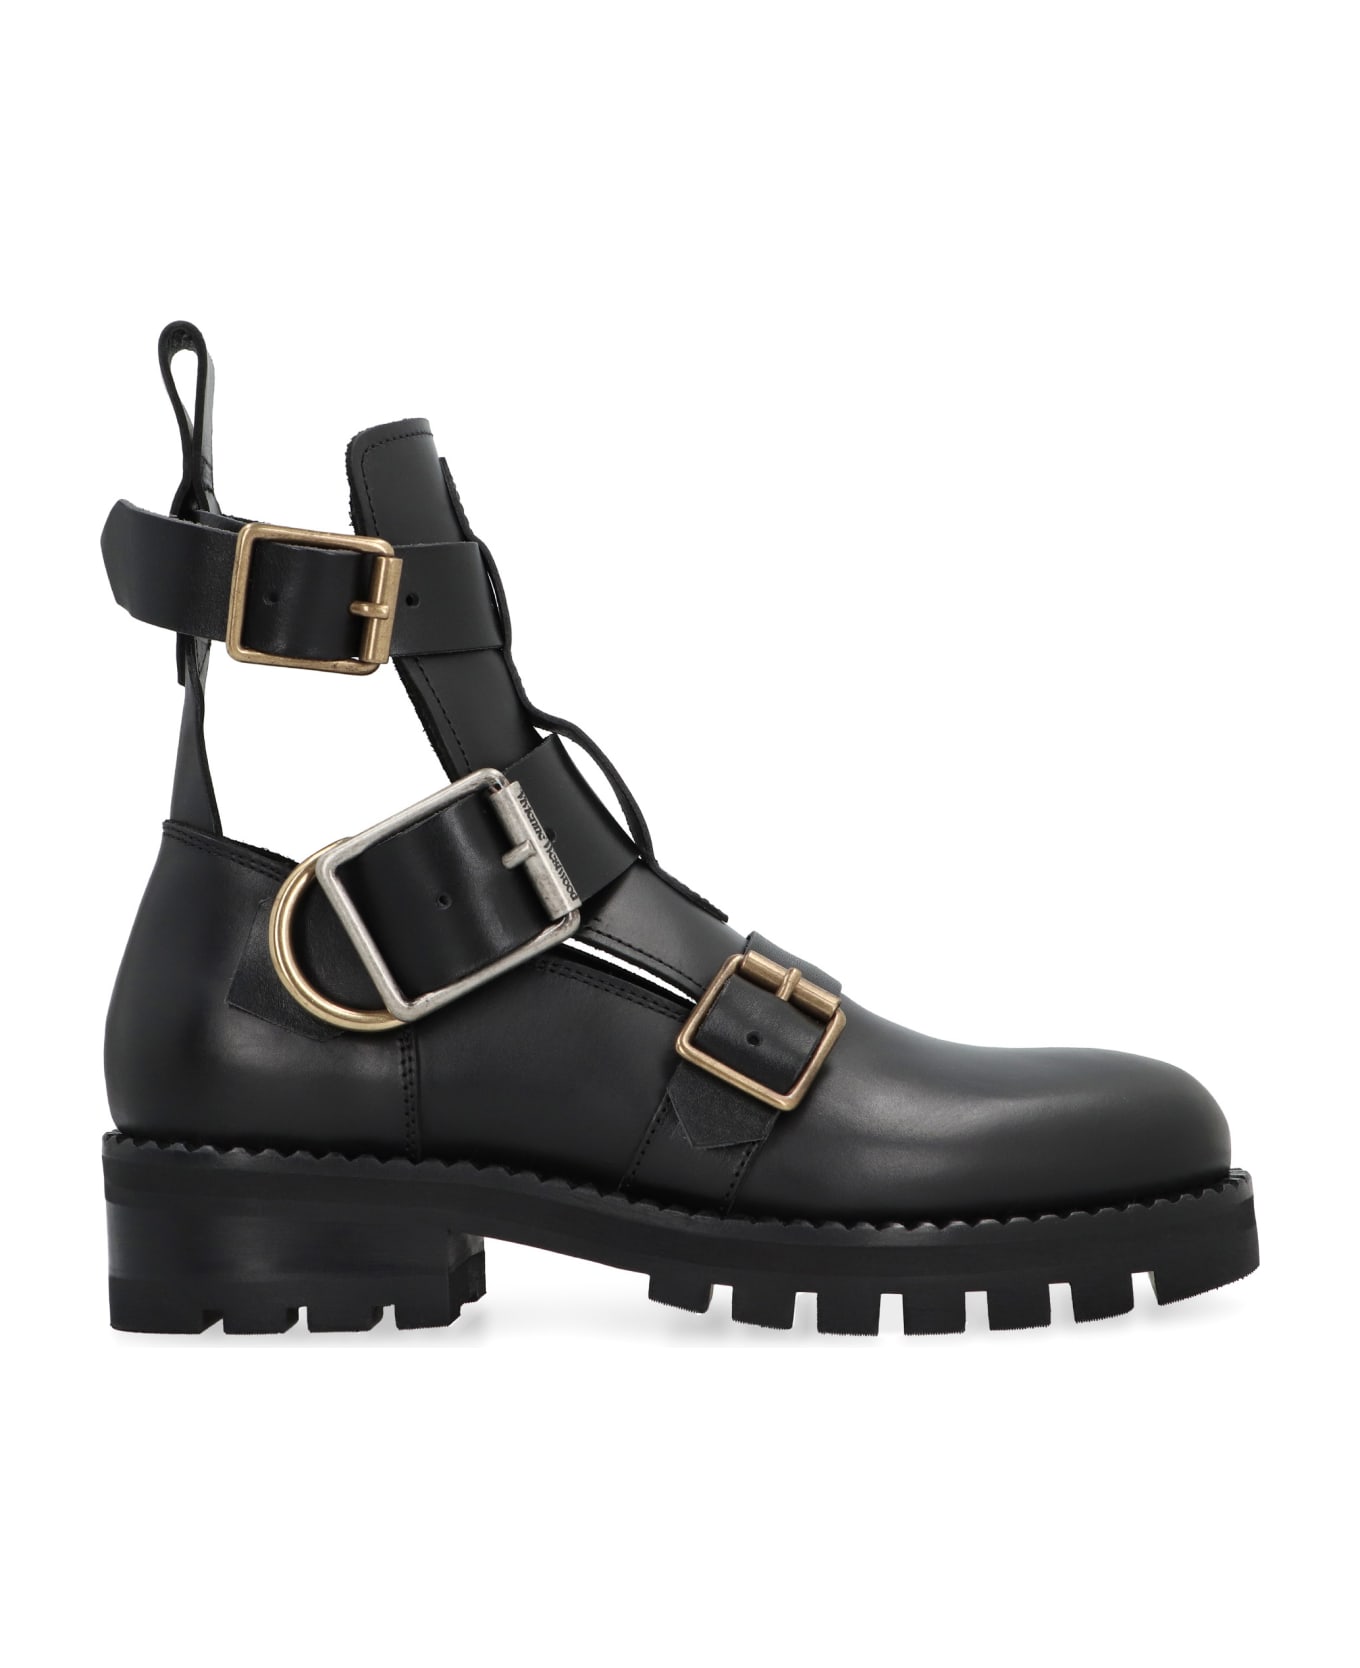 Vivienne Westwood Rome Leather Ankle Boots - black ブーツ